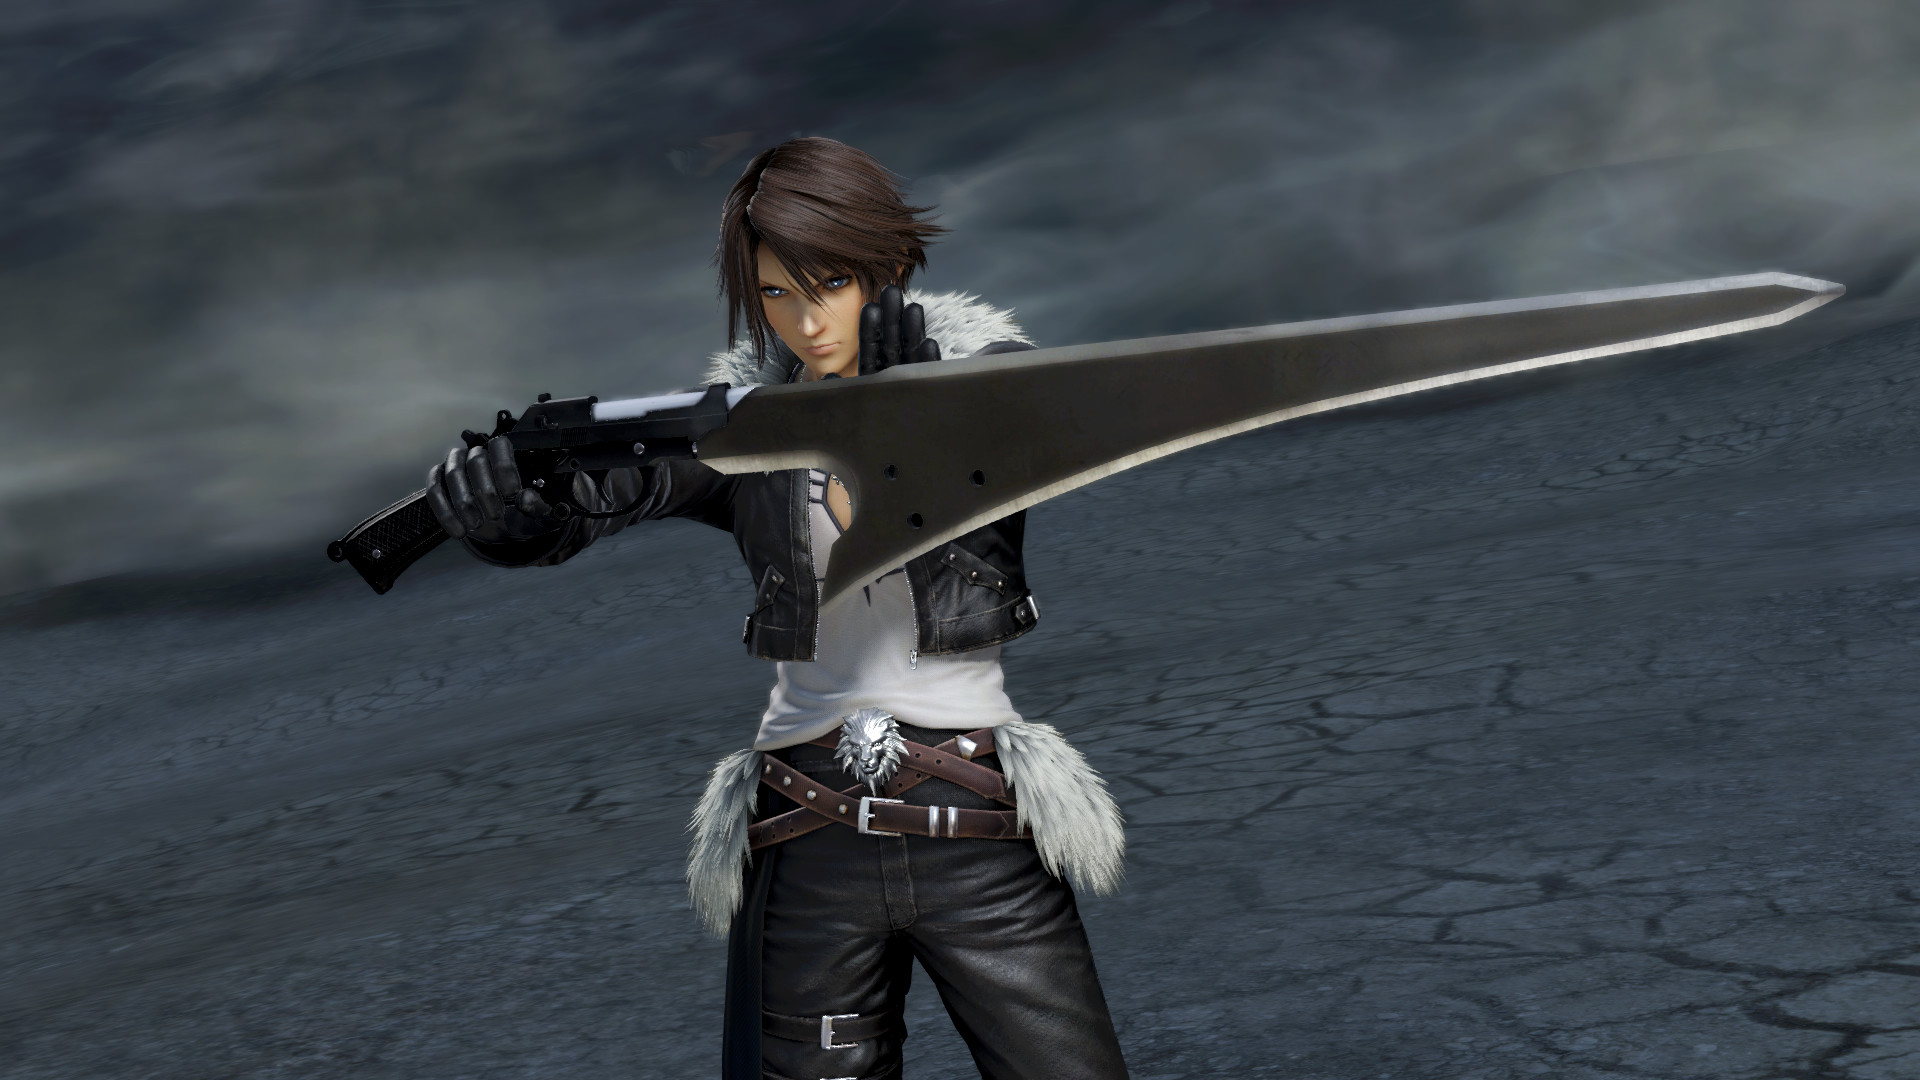 DFF NT: Hyperion, Squall Leonhart's 4th Weapon Featured Screenshot #1